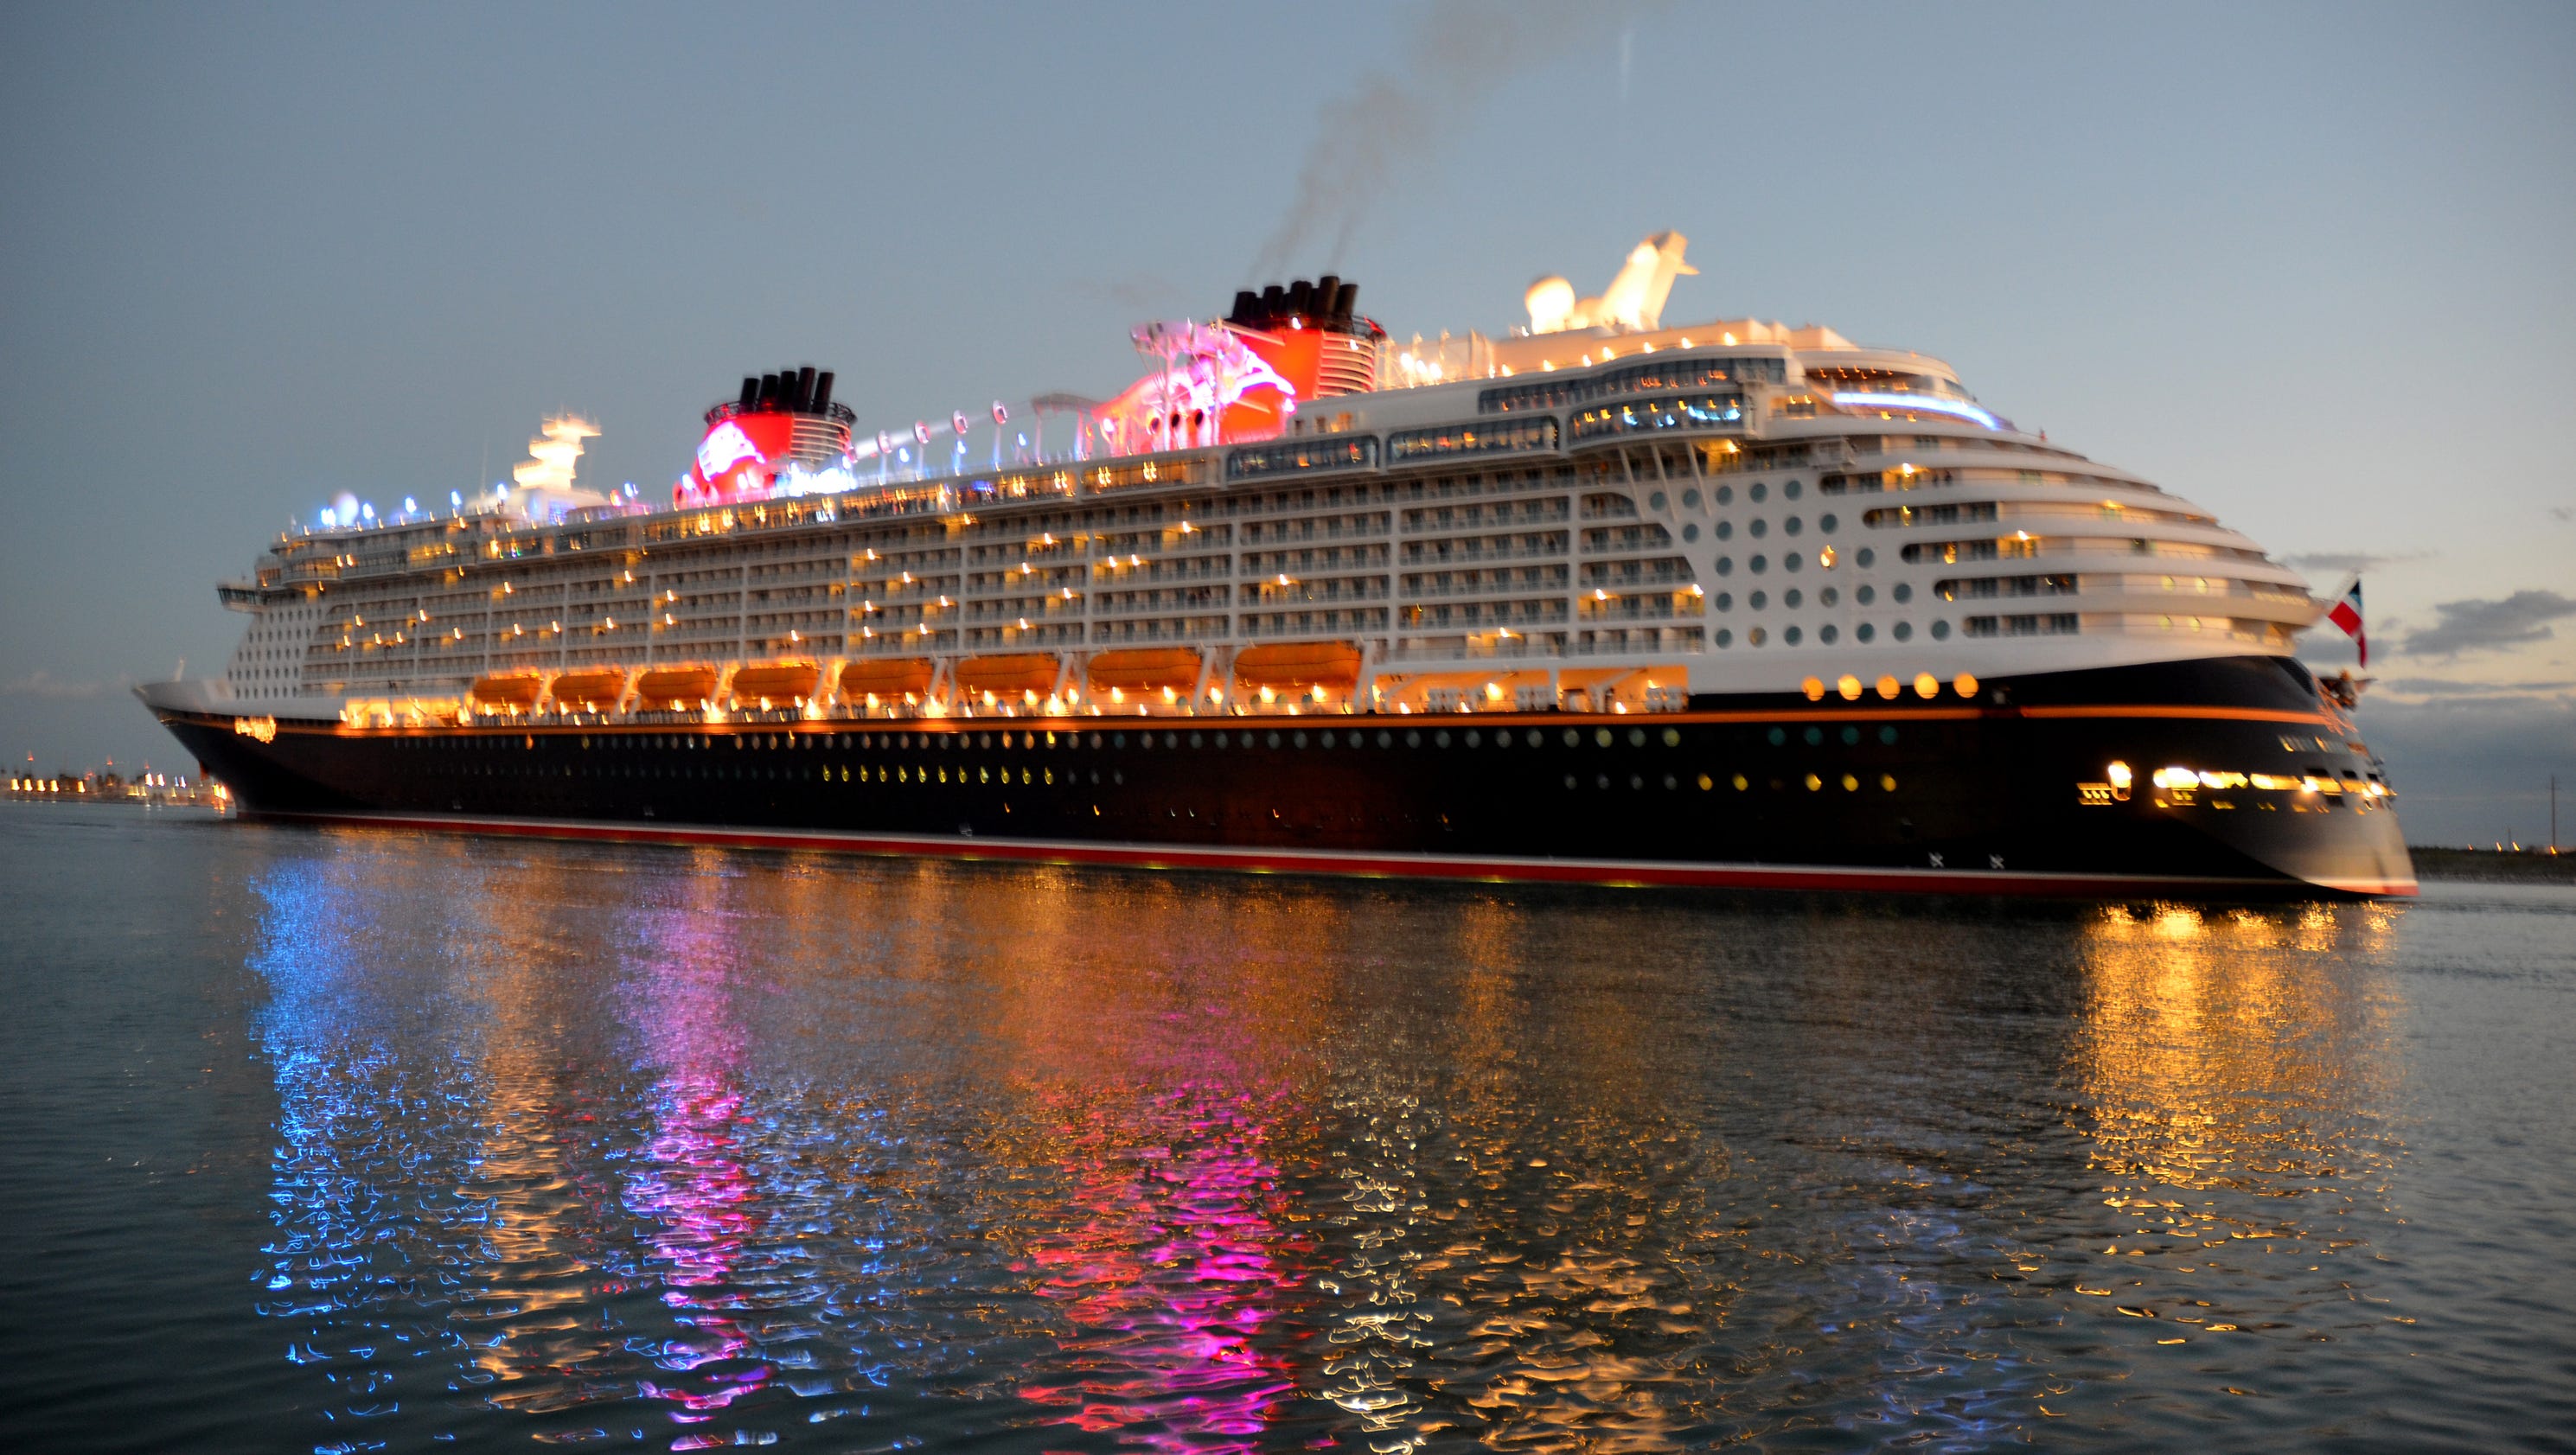 Disney extends twoship stay at Port Canaveral through 2018